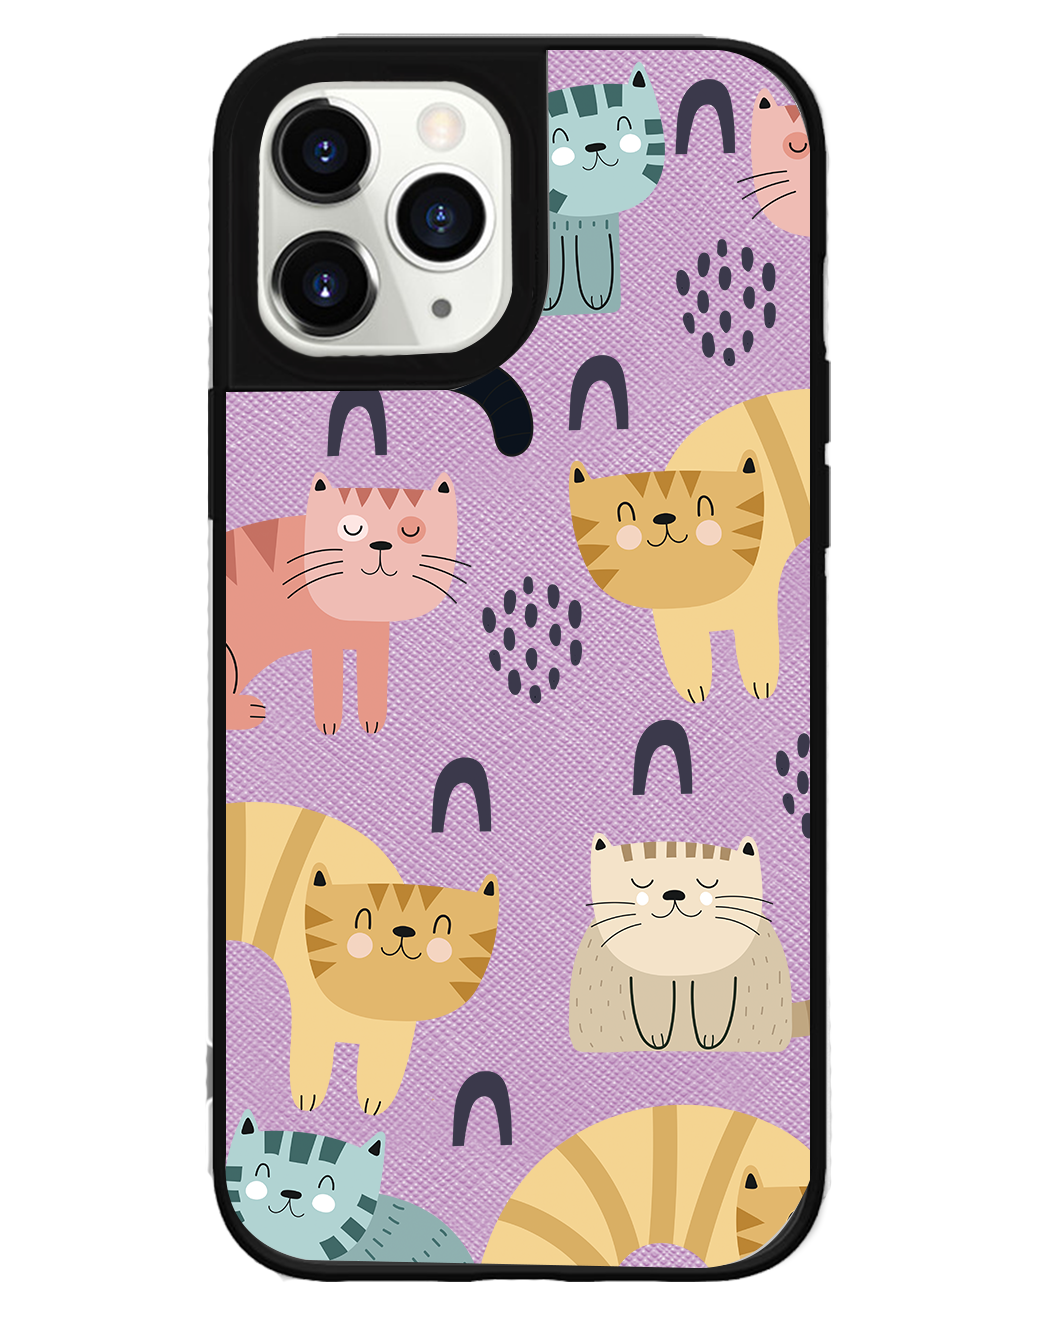 iPhone Leather Grip Case - Rainbow Meow 1.0